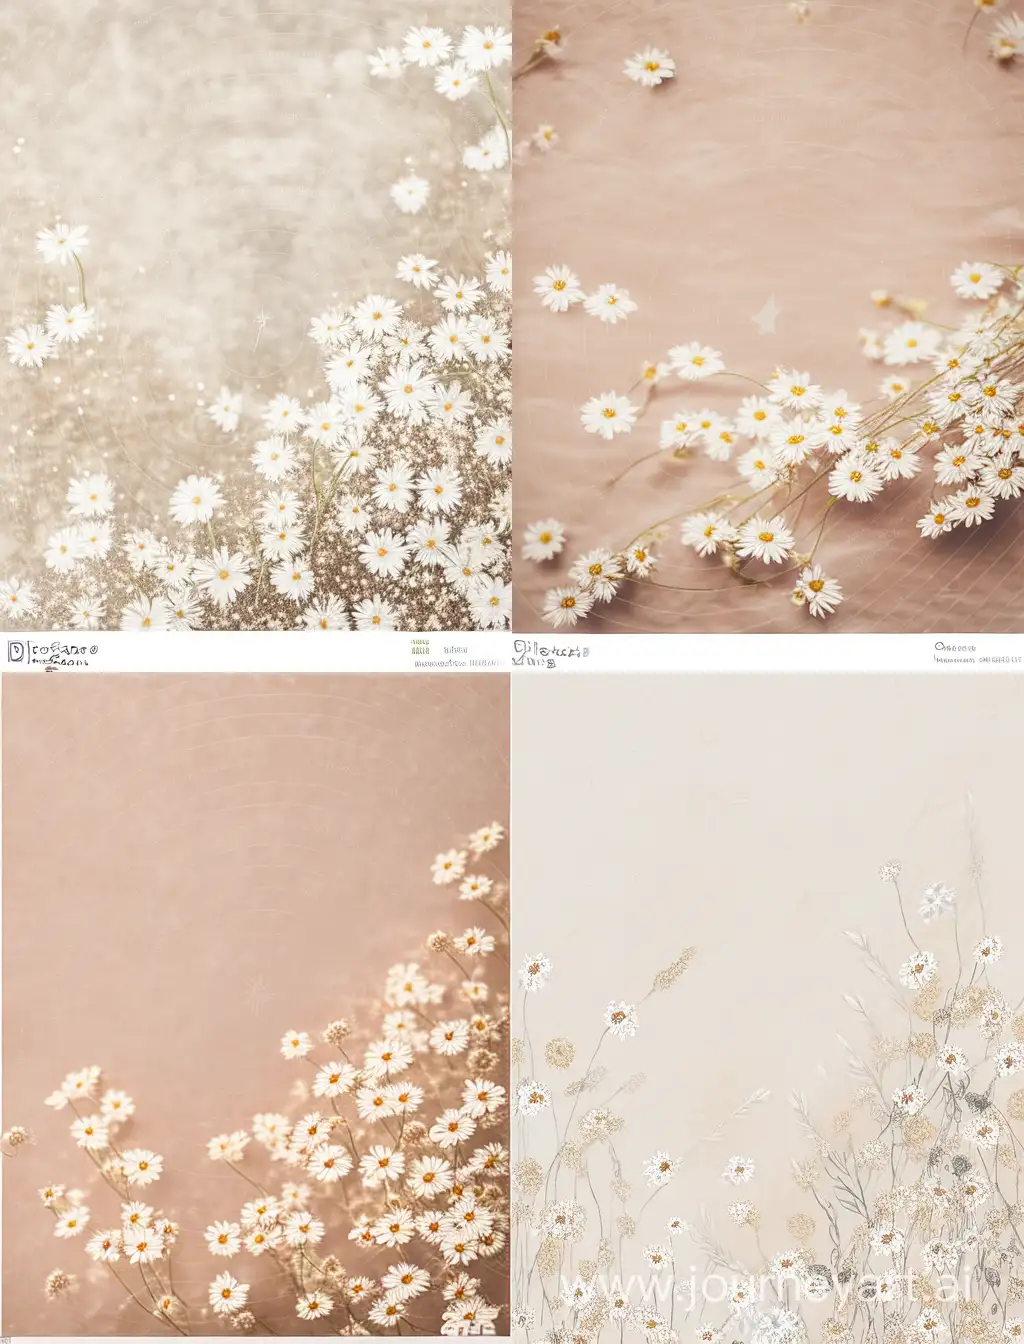 Beige background with gypsophilia and daisies flowers all around with a handdrawn concept